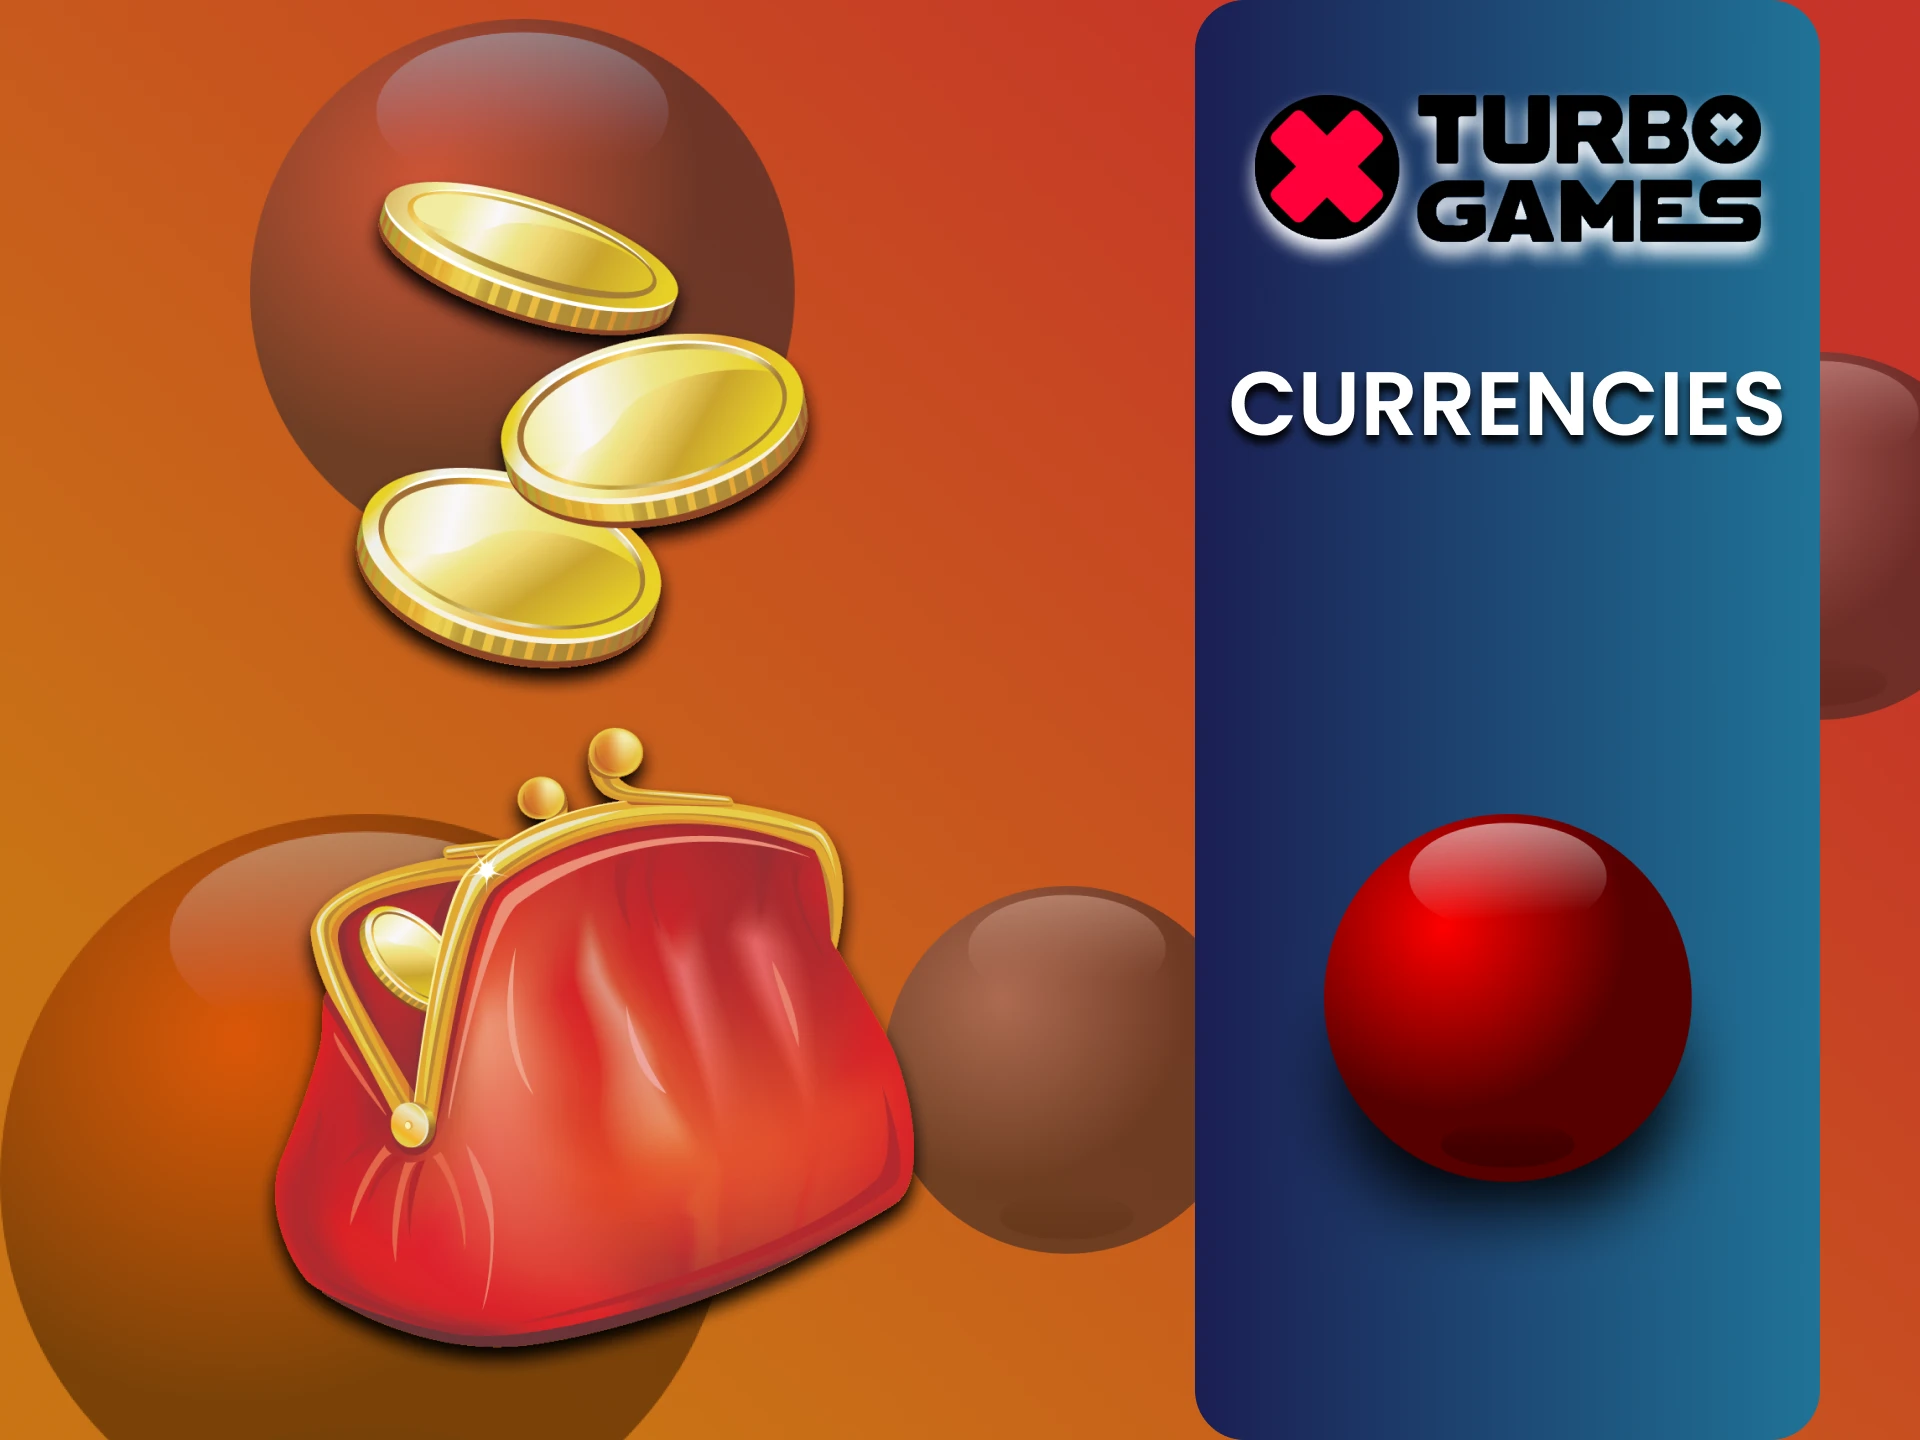 Choose the currency that is convenient for you in games from Turbo Games.